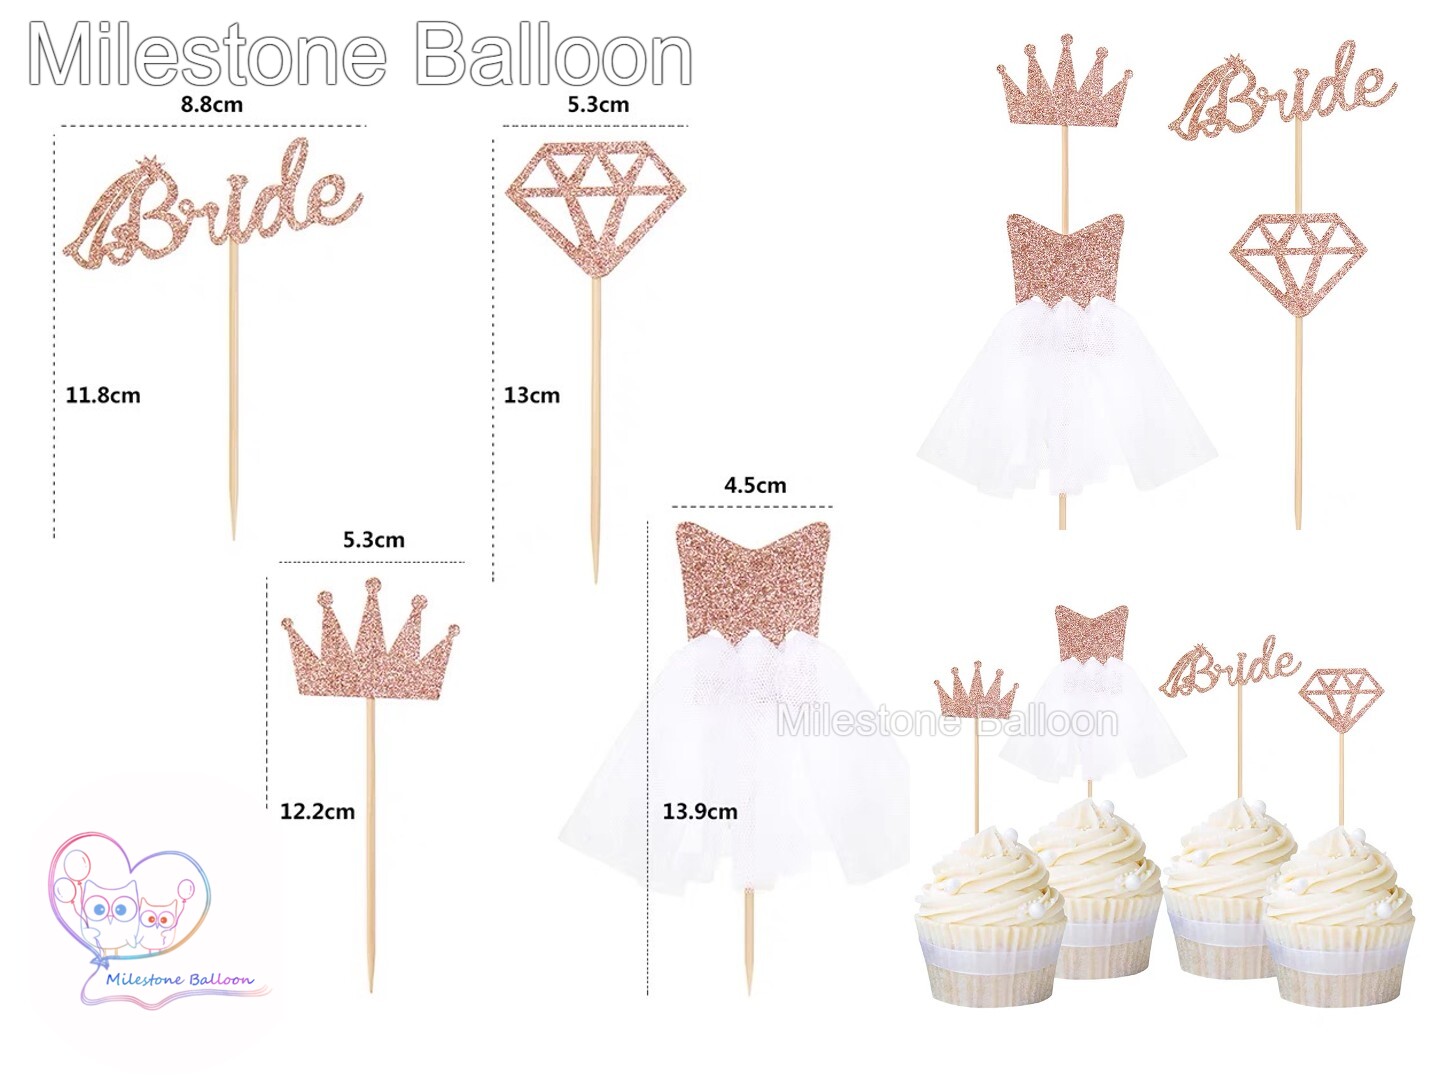 (Bridal Shower Cake Topper) Bride To Be 蛋糕牌 (鑽石皇冠裙) (4pcs in set) PECTS6